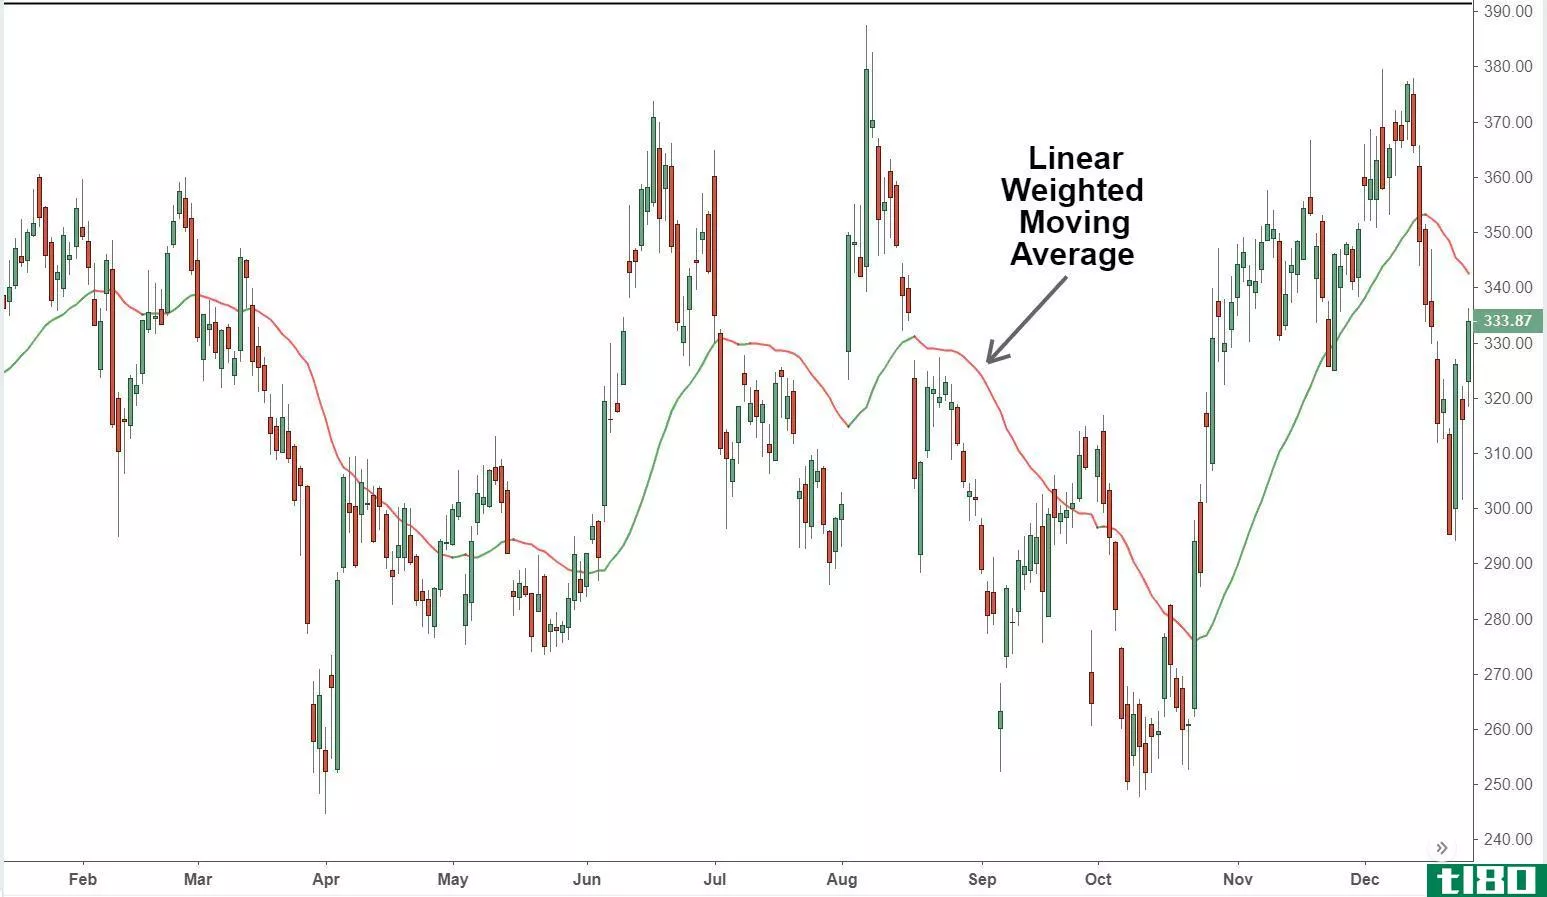 Linear Weighted Moving Average